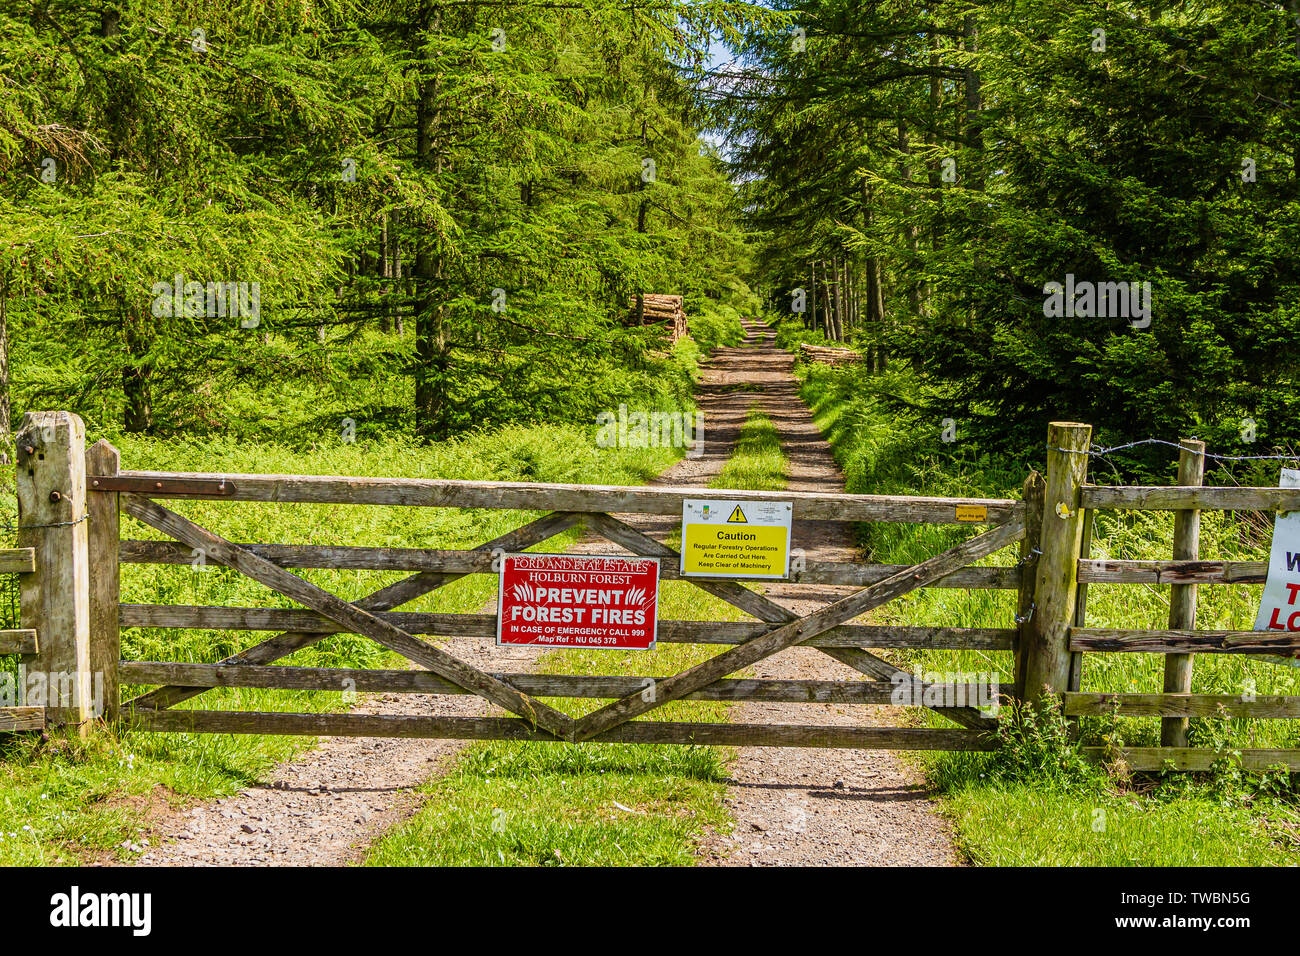 Sign on forest gate warning walkers, forestry workers and other users of the risk of starting a forest fire. Holburn, Northumberland, UK. June 2019. Stock Photo